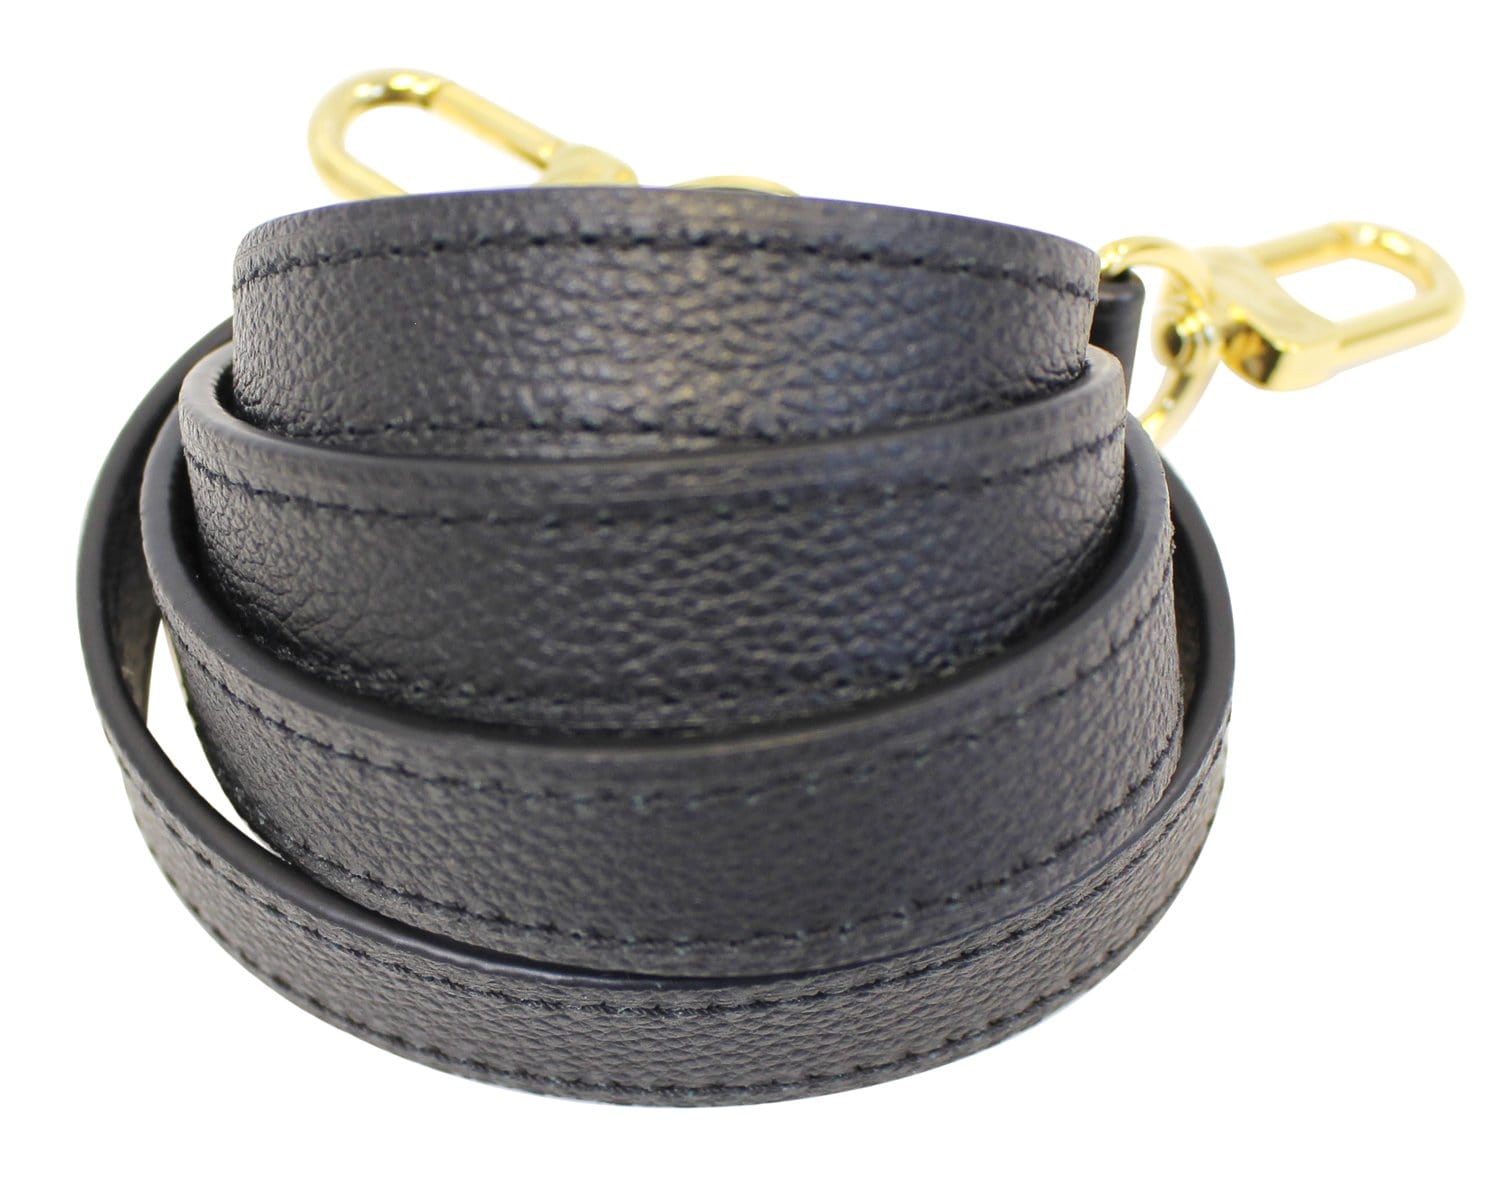 Adjustable Leather Bag Strap - Replacement Strap for Louis Vuitton